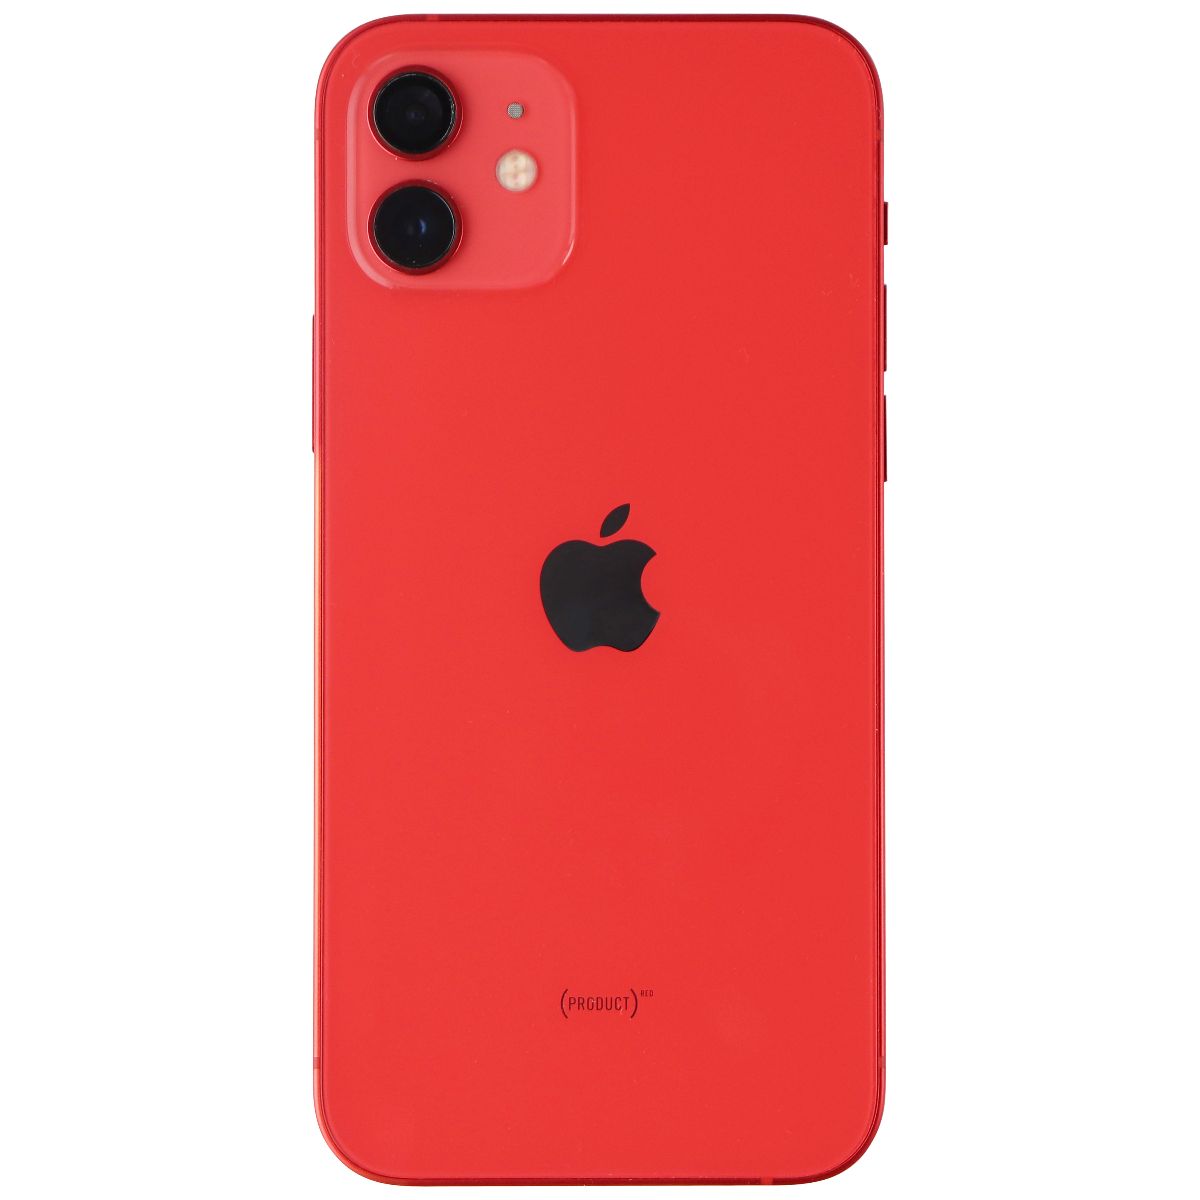 Apple iPhone 12 (6.1-inch) Smartphone (A2172) Unlocked - 128GB / Red Cell Phones & Smartphones Apple    - Simple Cell Bulk Wholesale Pricing - USA Seller